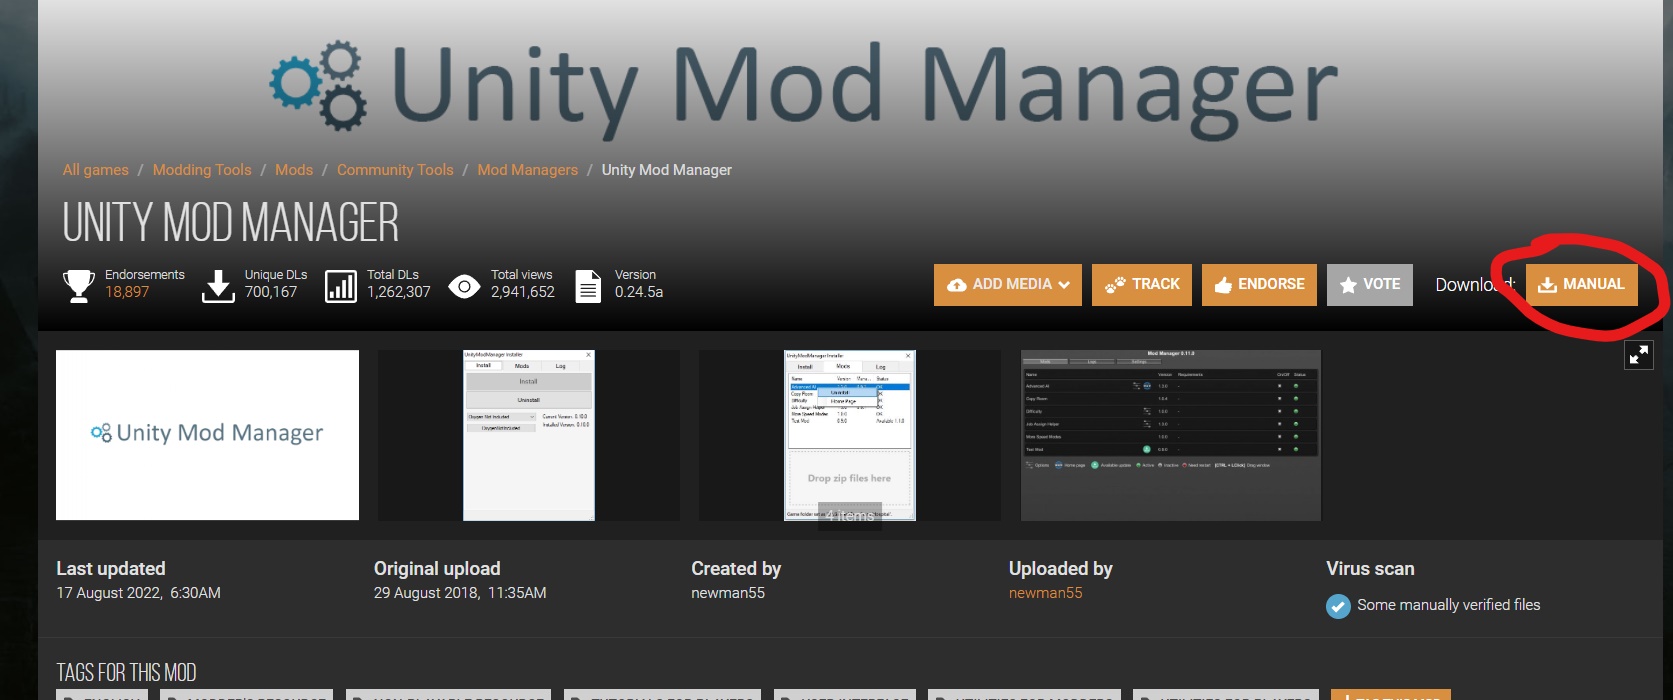 Sailwind Mod Installation in Unity Mod Manager - Step by Step Download for Dummies - 41D898B